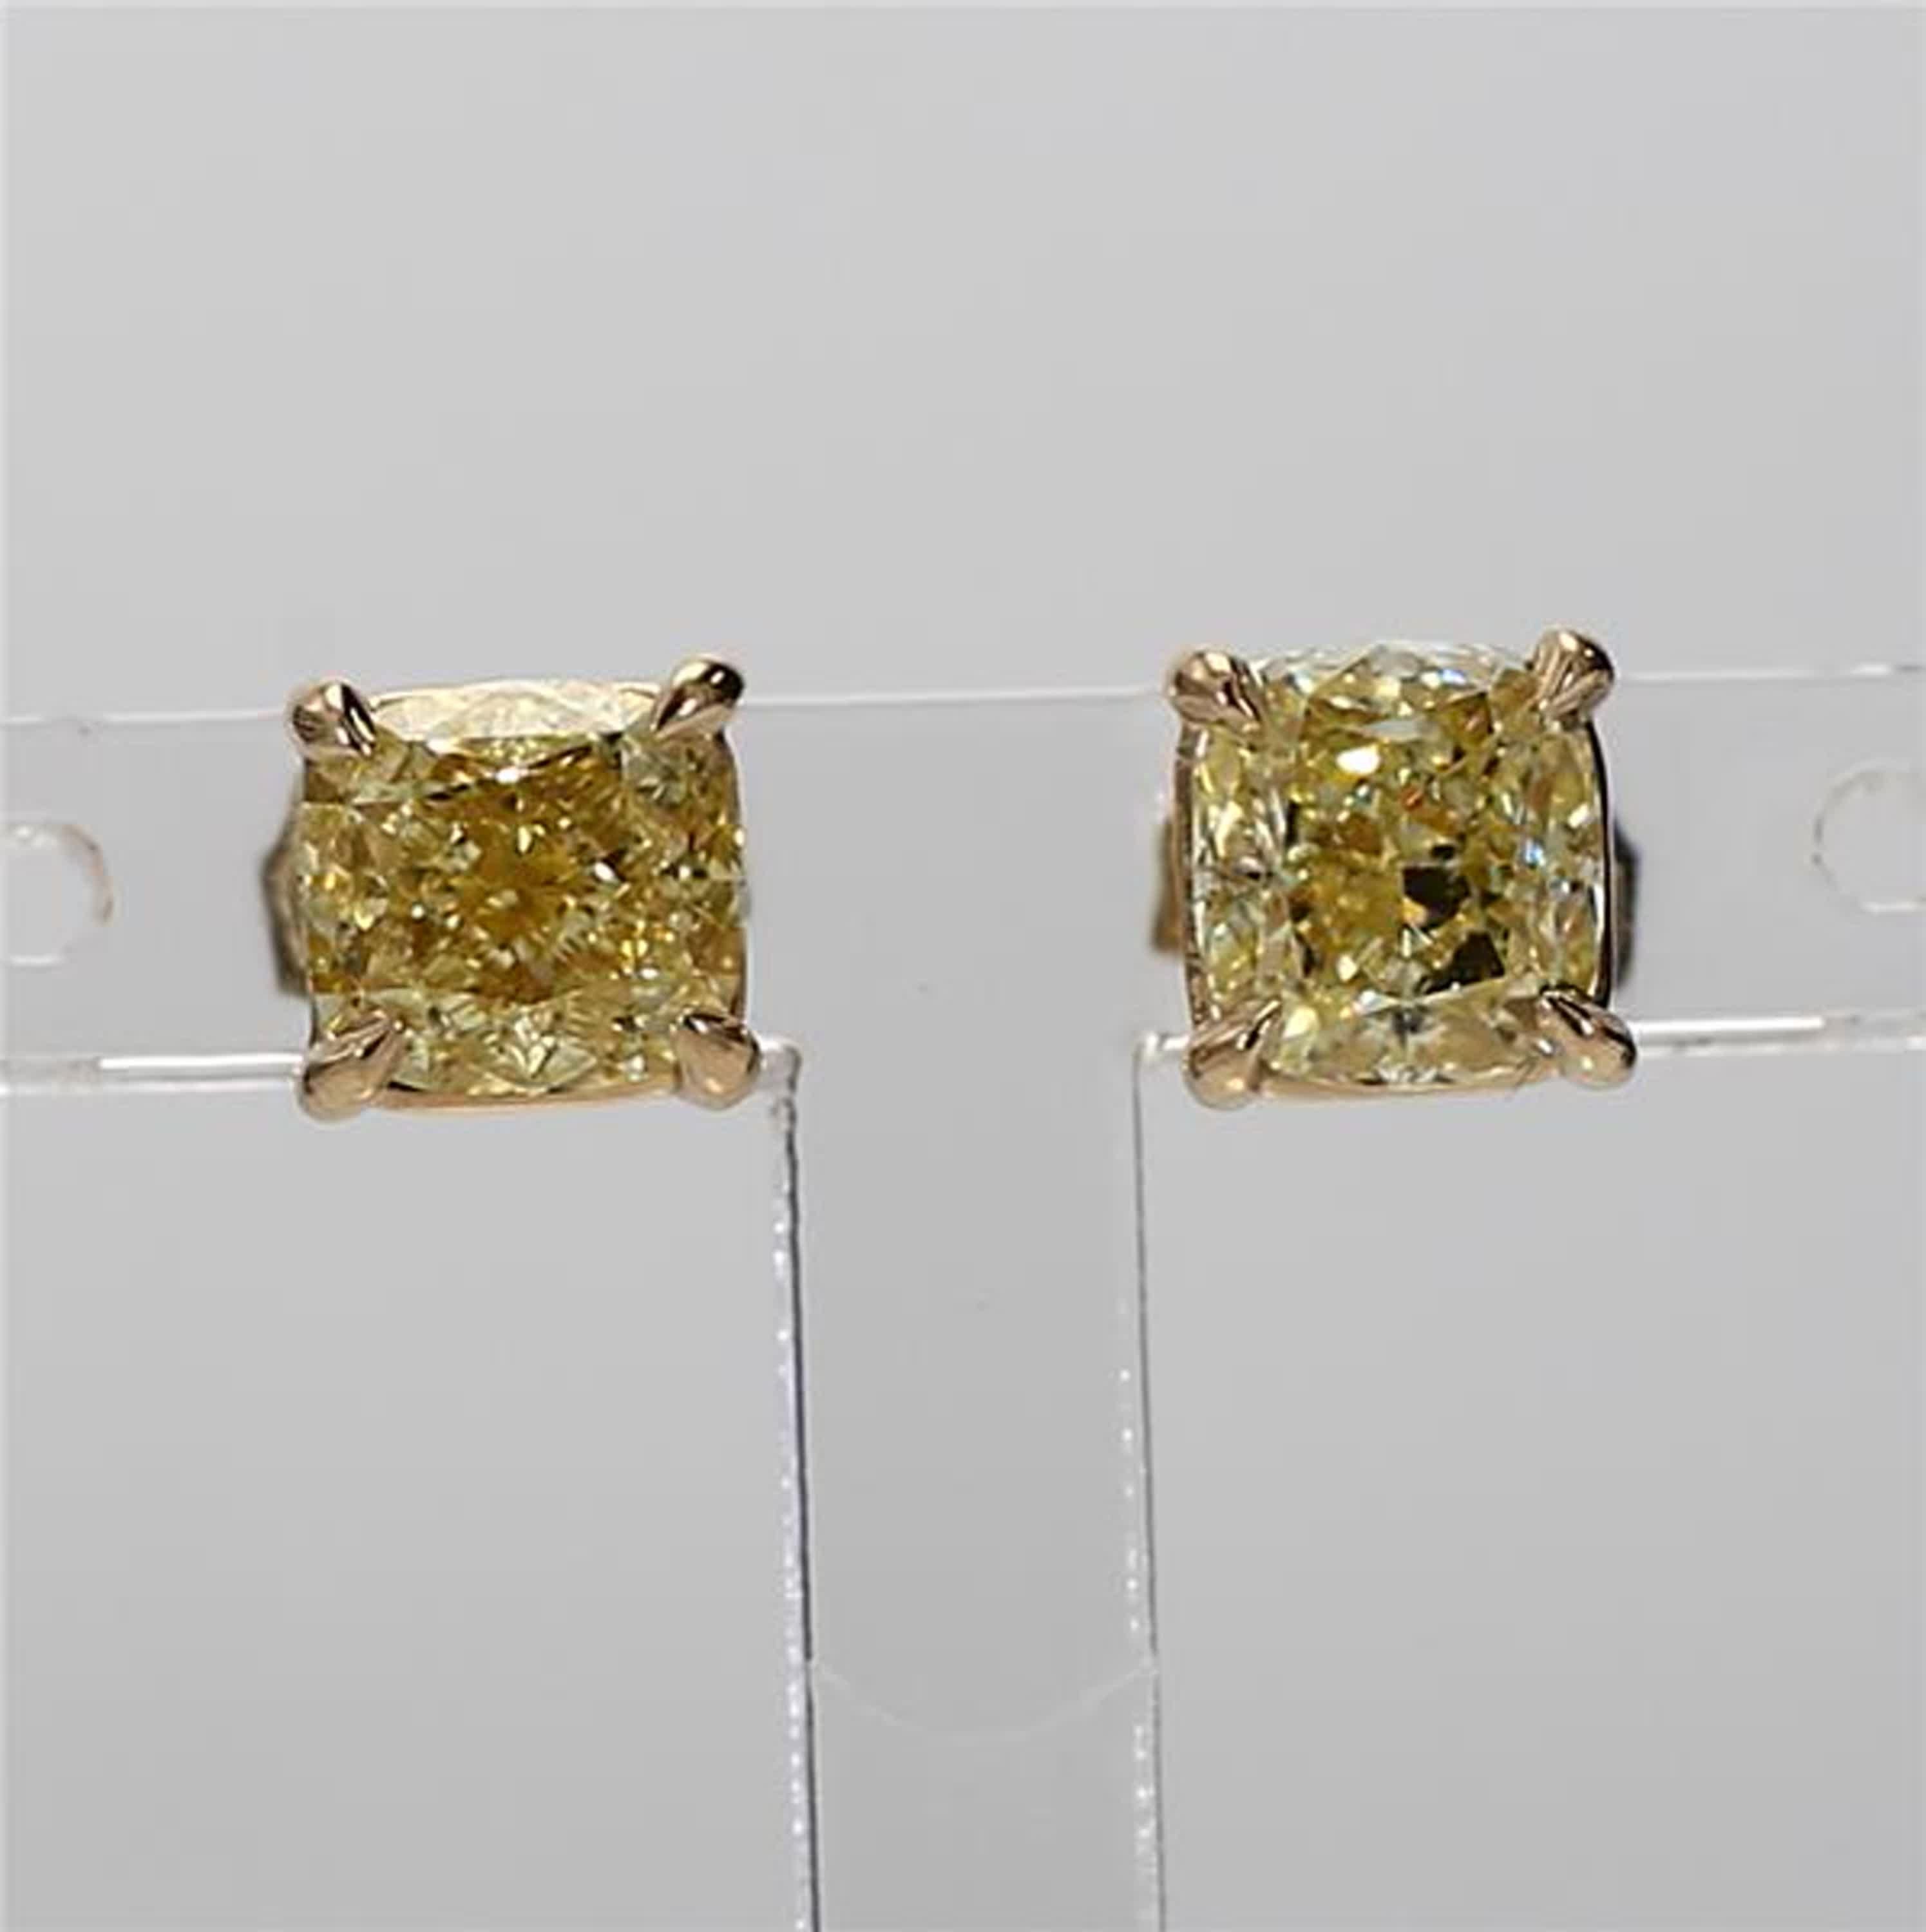 RareGemWorld's classic GIA certified diamond earrings. Mounted in a beautiful 14K Yellow Gold setting with natural cushion cut yellow diamonds. These earrings are guaranteed to impress and enhance your personal collection!

Total Weight: